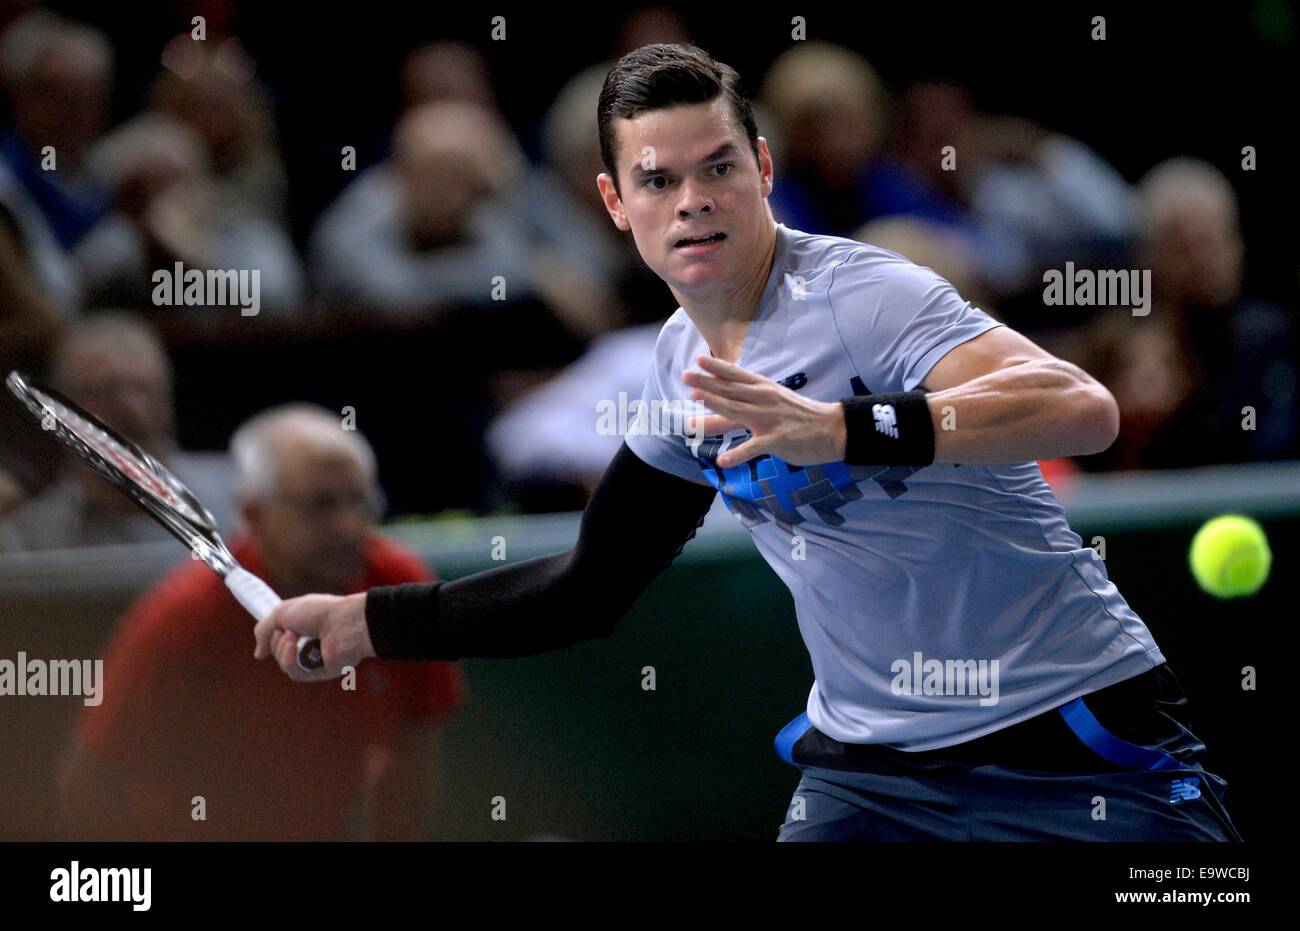 Paris, France. 2nd Nov, 2014. Milos Raonic of Canada hits a return during  the men's singles final match against Novak Djokovic of Serbia at the ATP  World Tour Masters 1000 indoor tennis